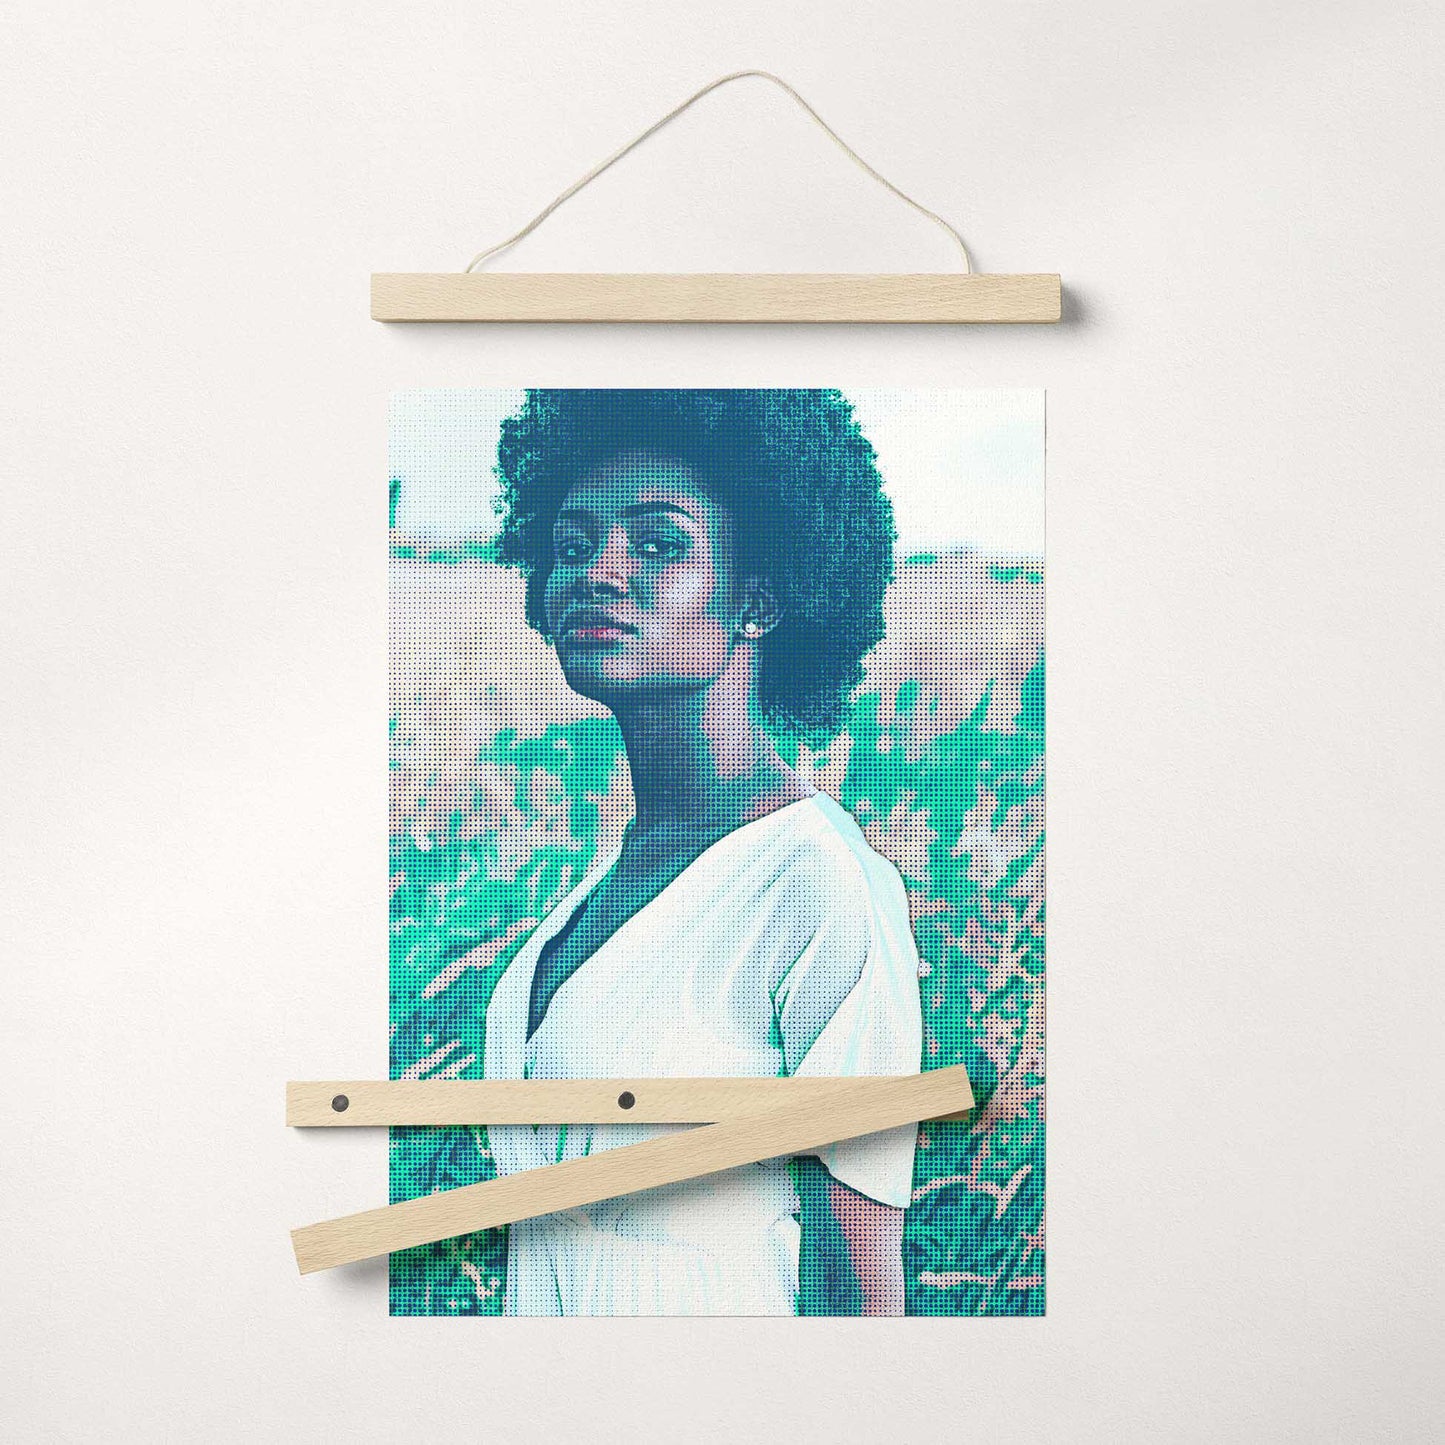 Discover the artistic allure of the Personalised Teal Grunge Poster Hanger. Printed from your photo with a grunge effect and halftone filter, it showcases teal hues that pop with vividness and vibrancy. This retro and old school-inspired wall art print